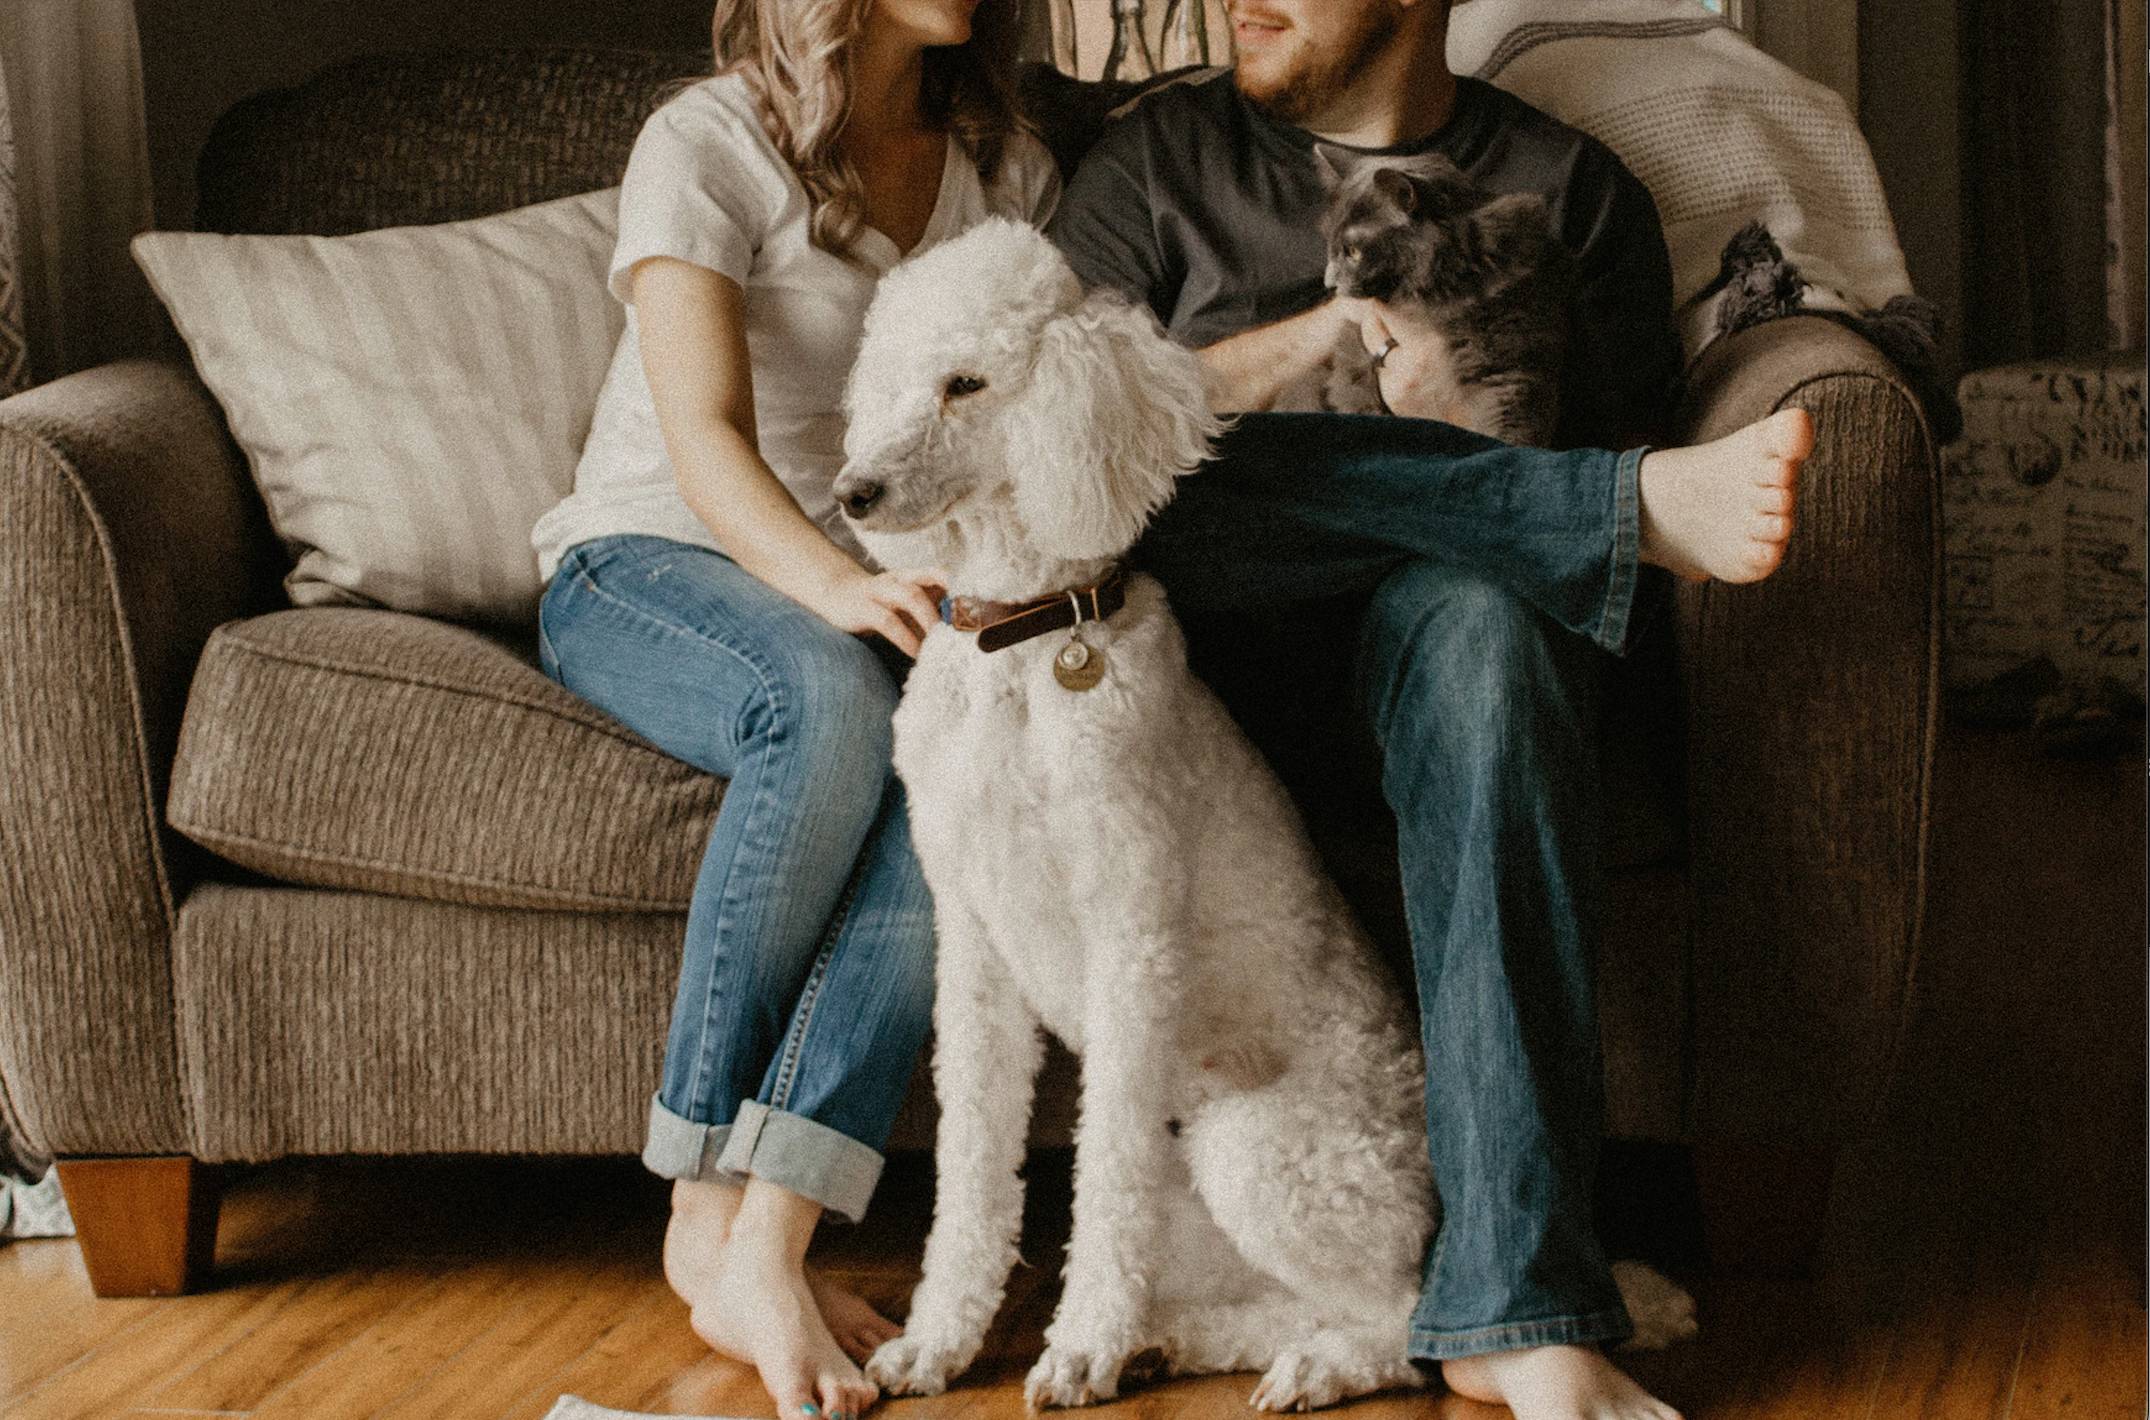 Image of a family sitting on a couch with their dog and cat.